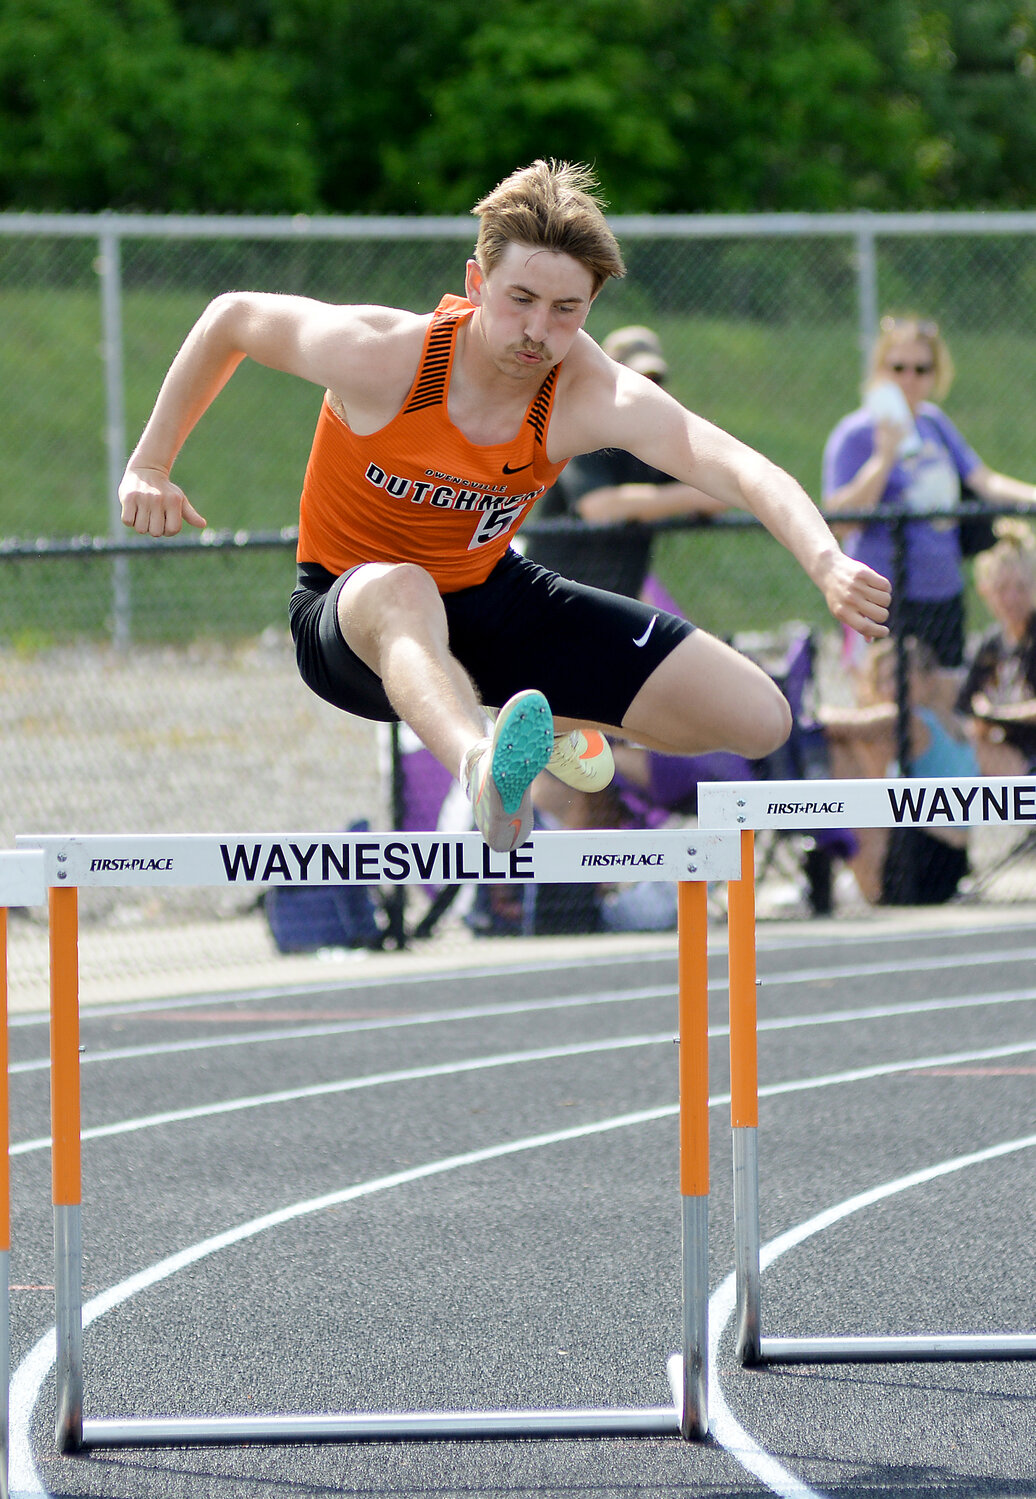 Bryce Payne clears a hurdle during the boys 300m hurdles. Payne won a district title in the 110m hurdles before placing second in the 300m hurdles.